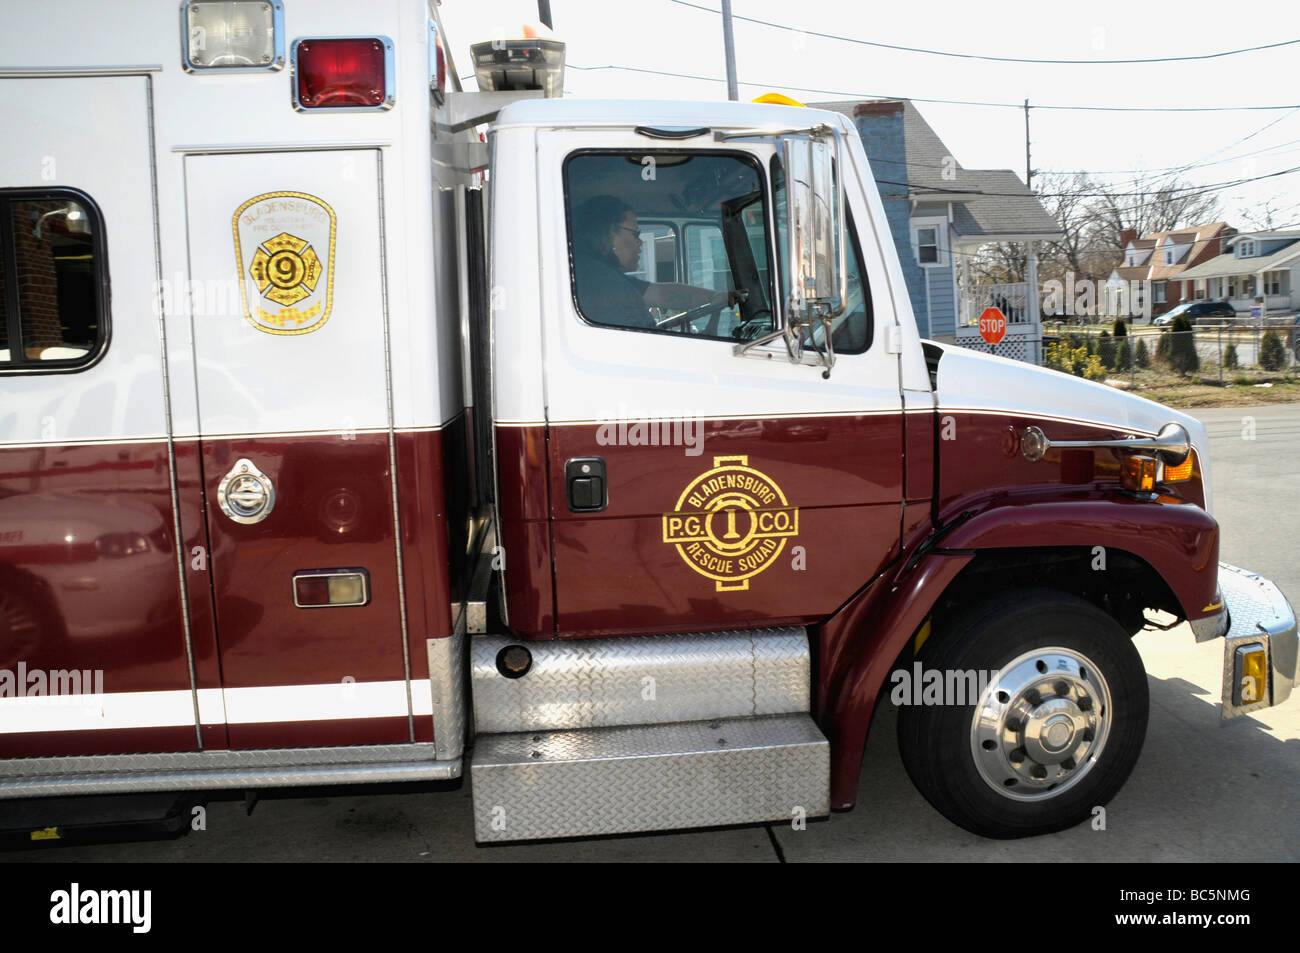 ambulance responding on a call in Bladensburg Maryland Stock Photo